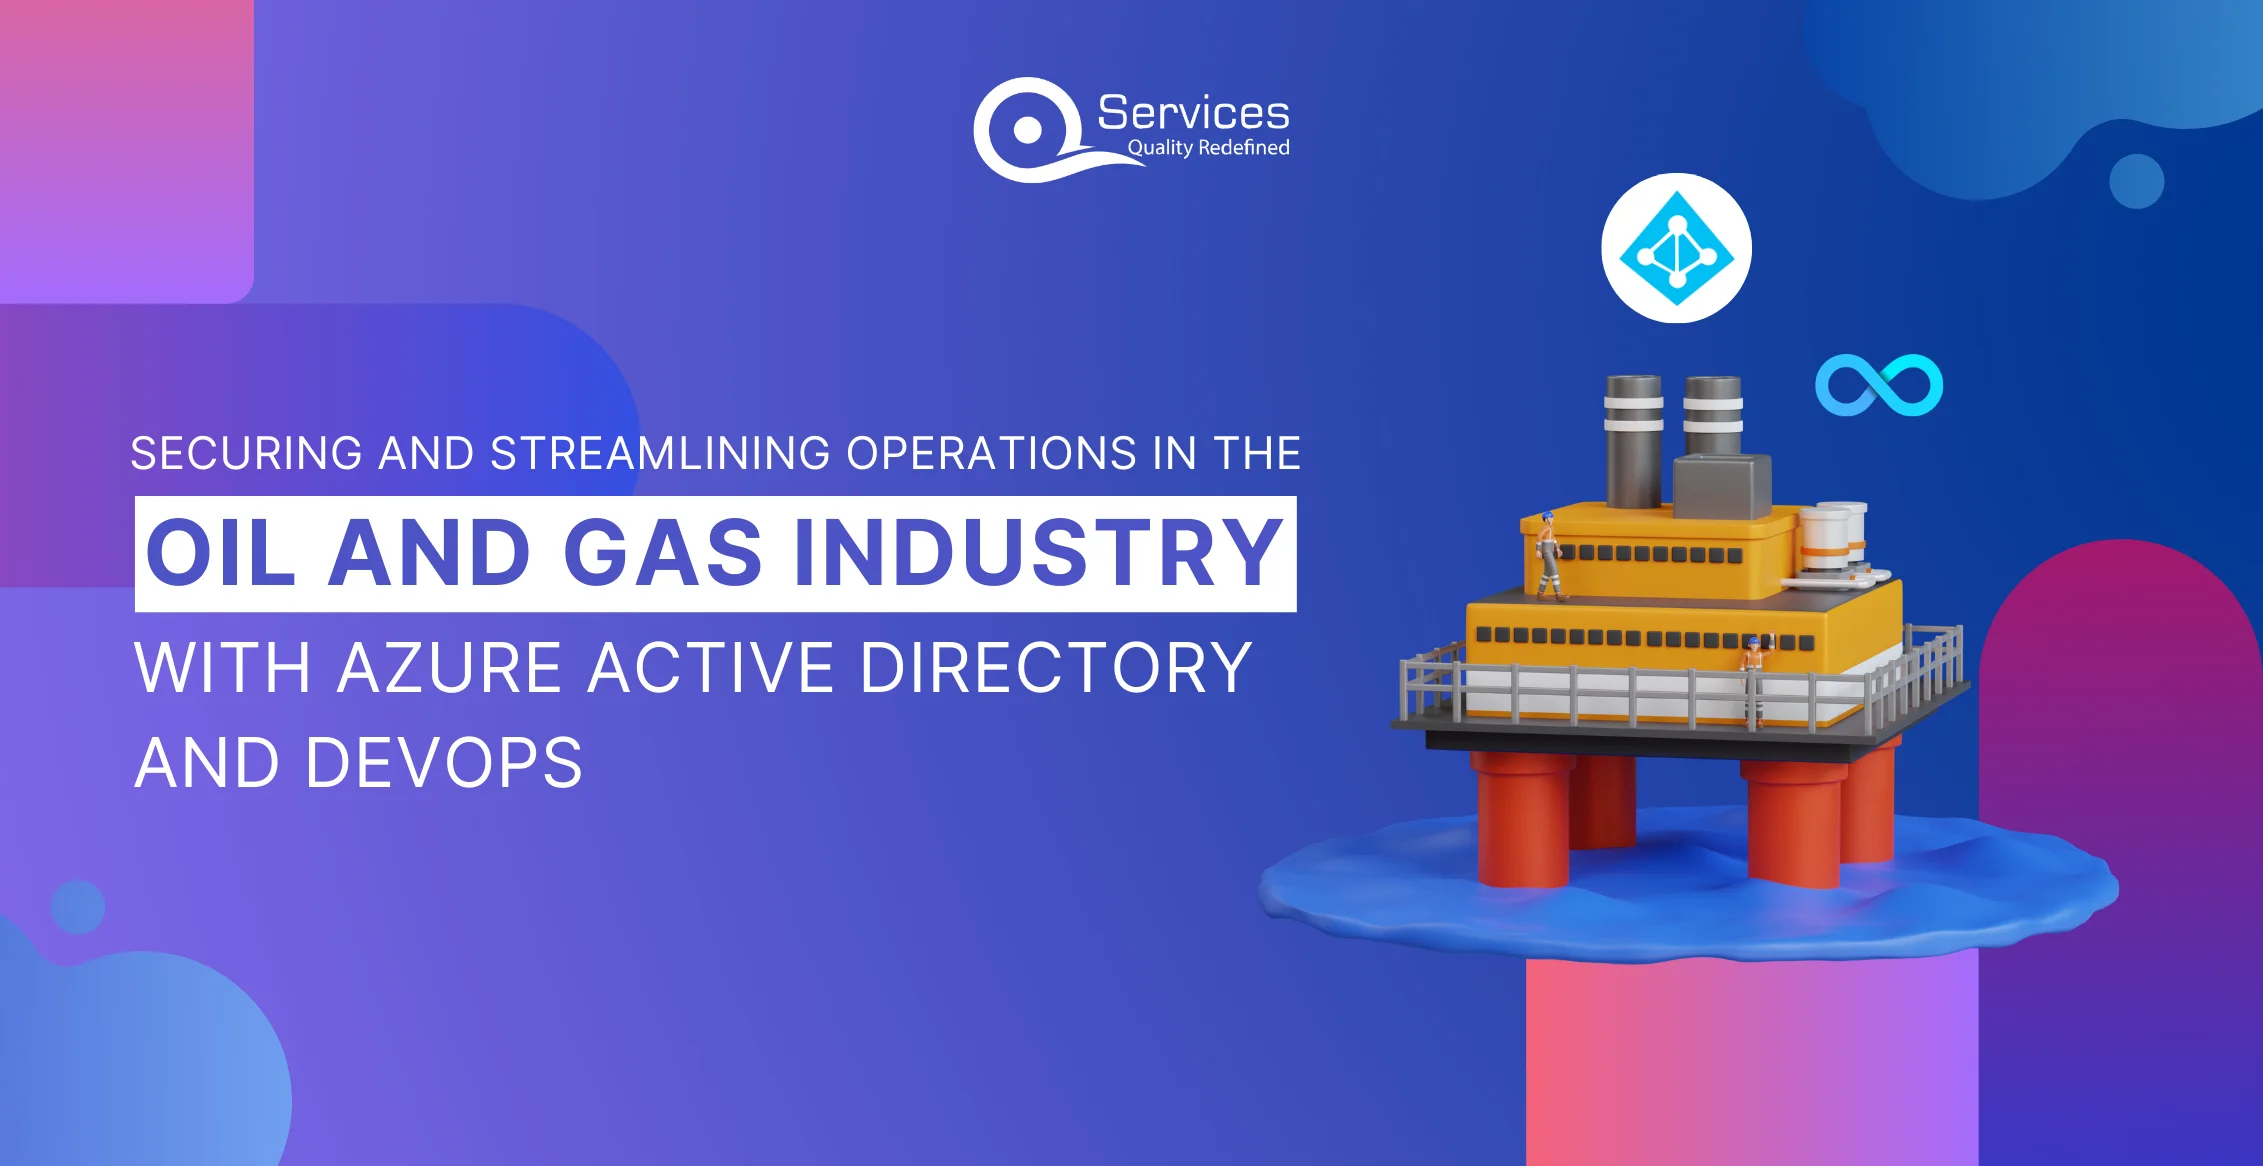 Securing and Streamlining Operations in the Oil and Gas Industry with Azure Active Directory and DevOps